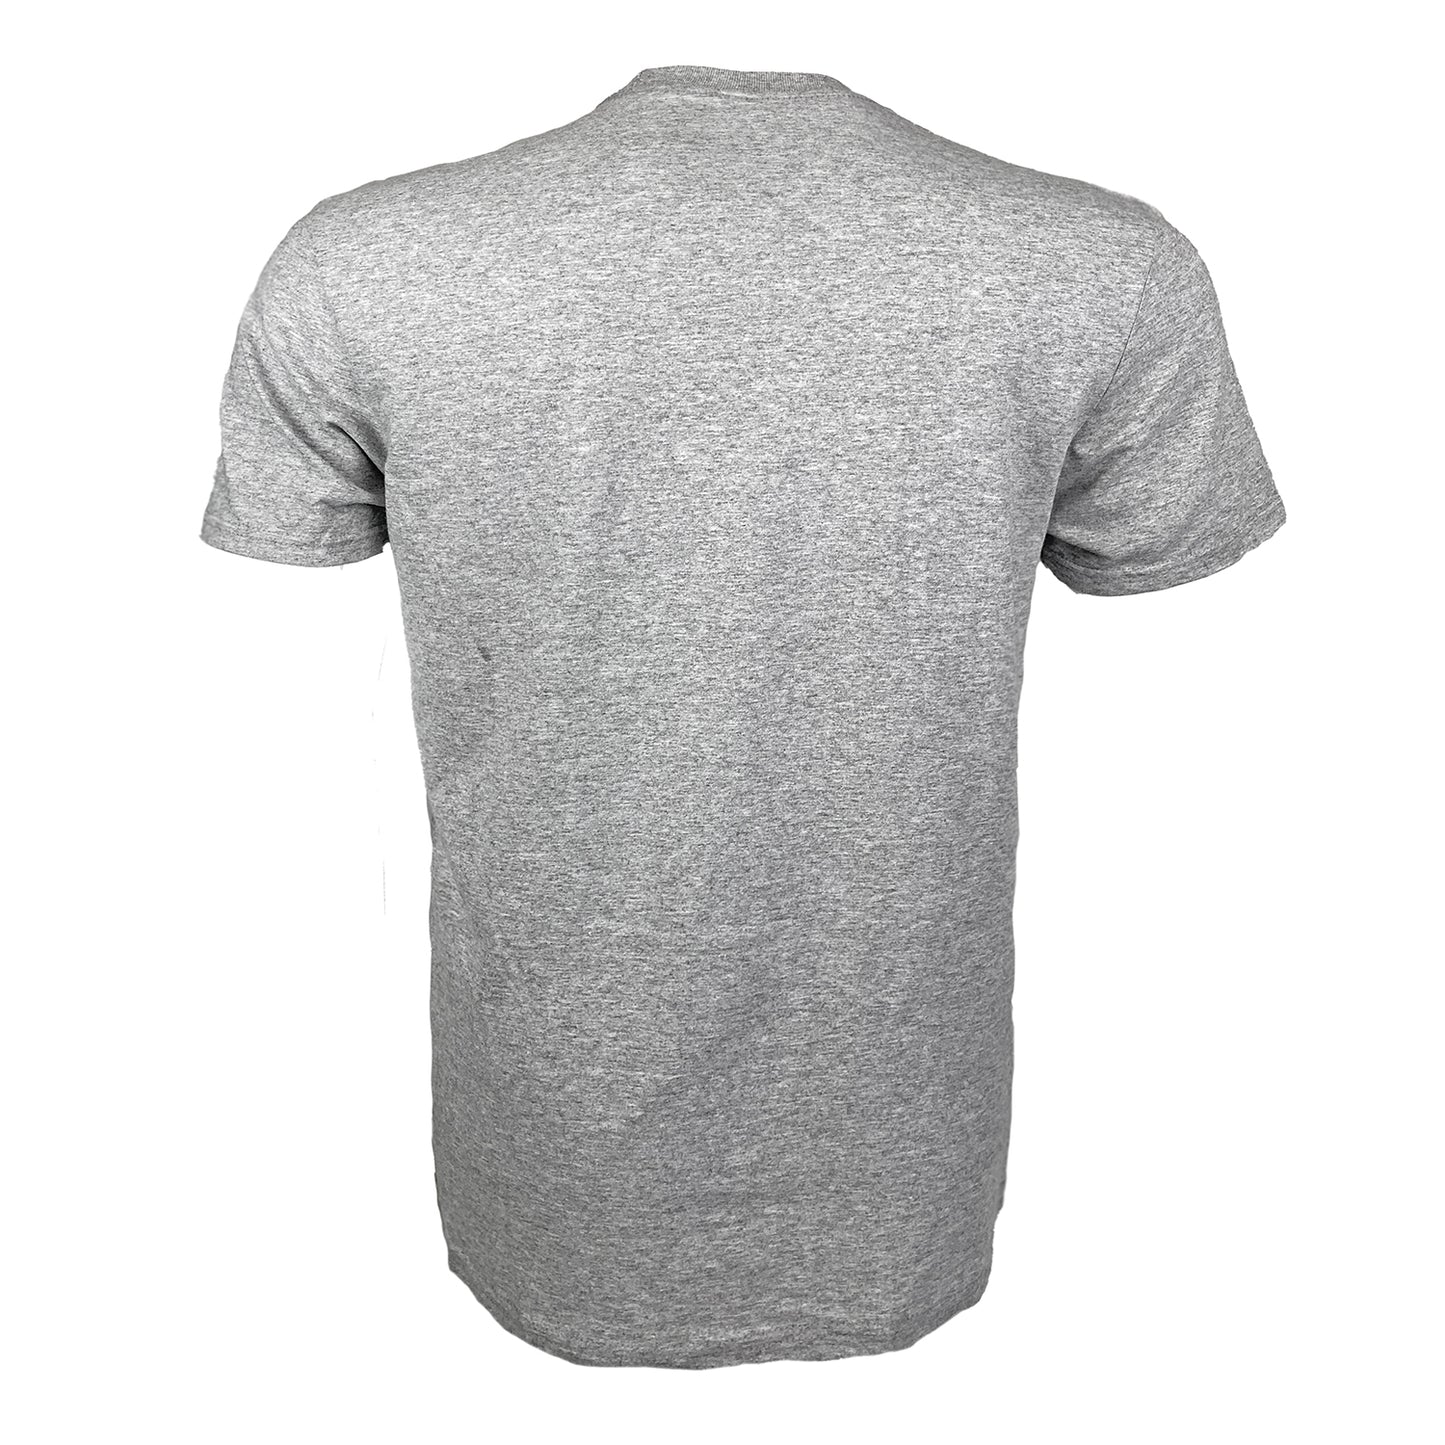 Gray tee shown from the back.